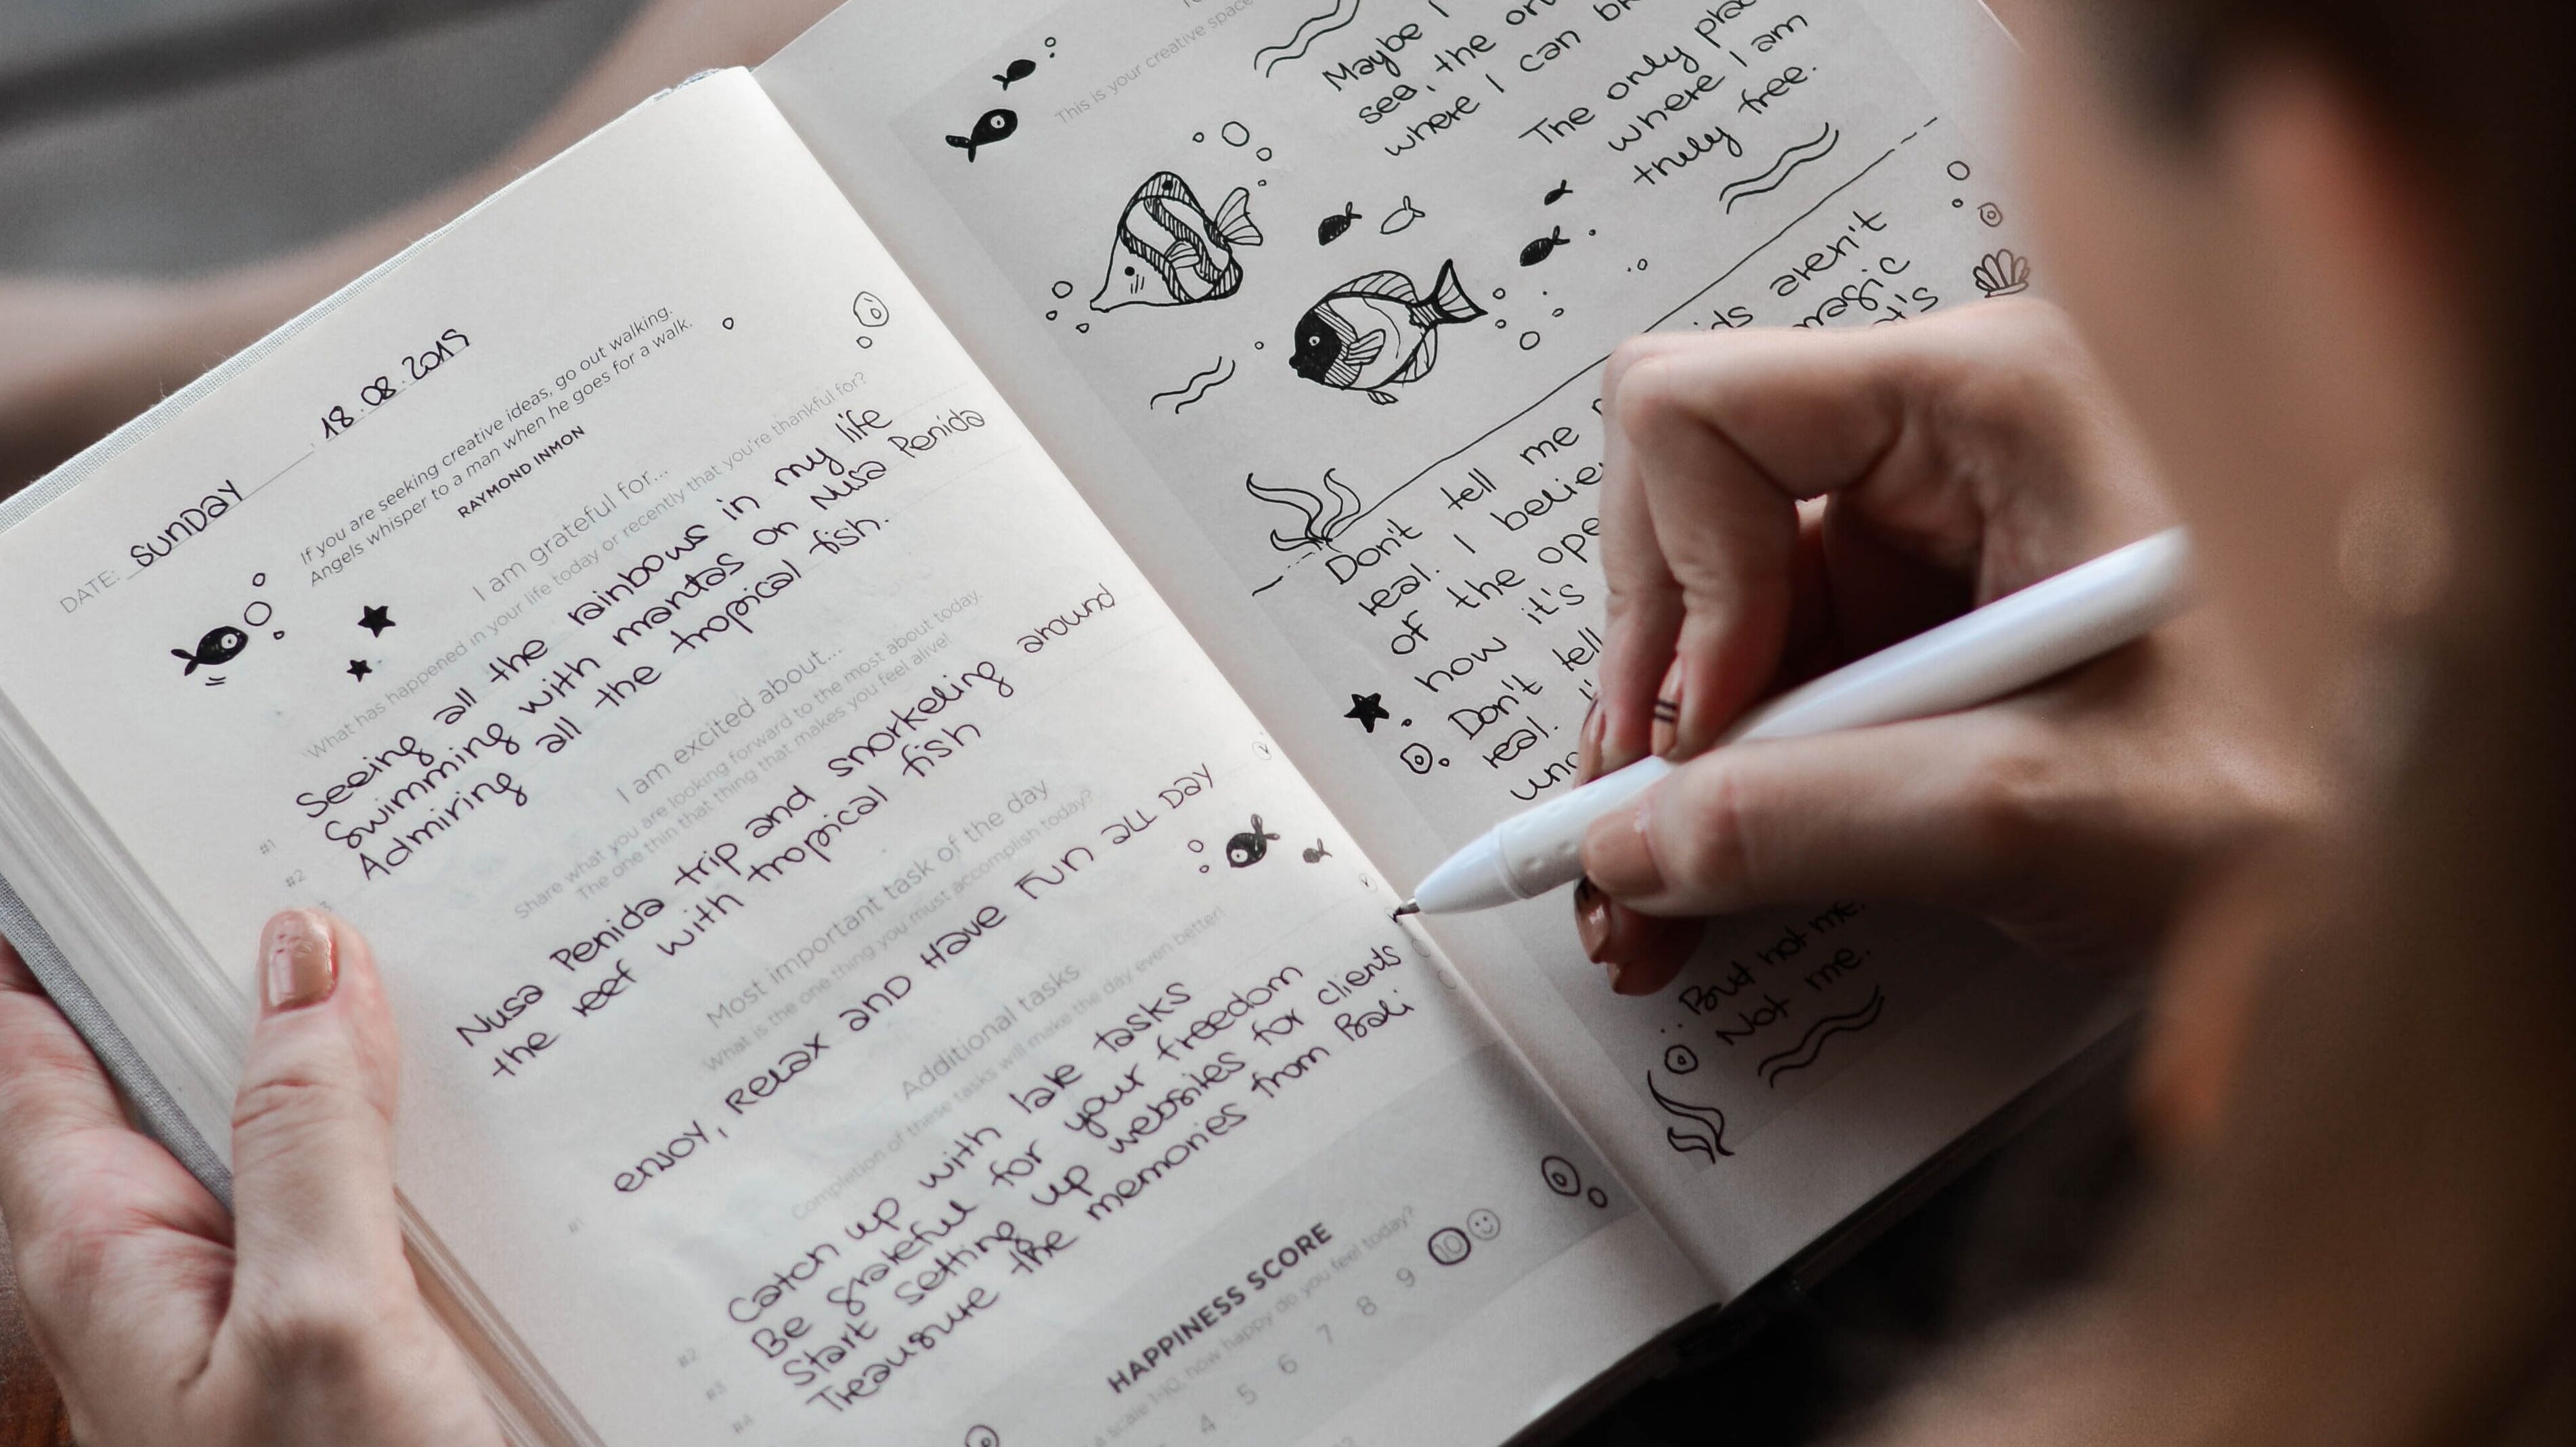 How to Keep a Bullet Journal Organized: Four Tips That Really Work